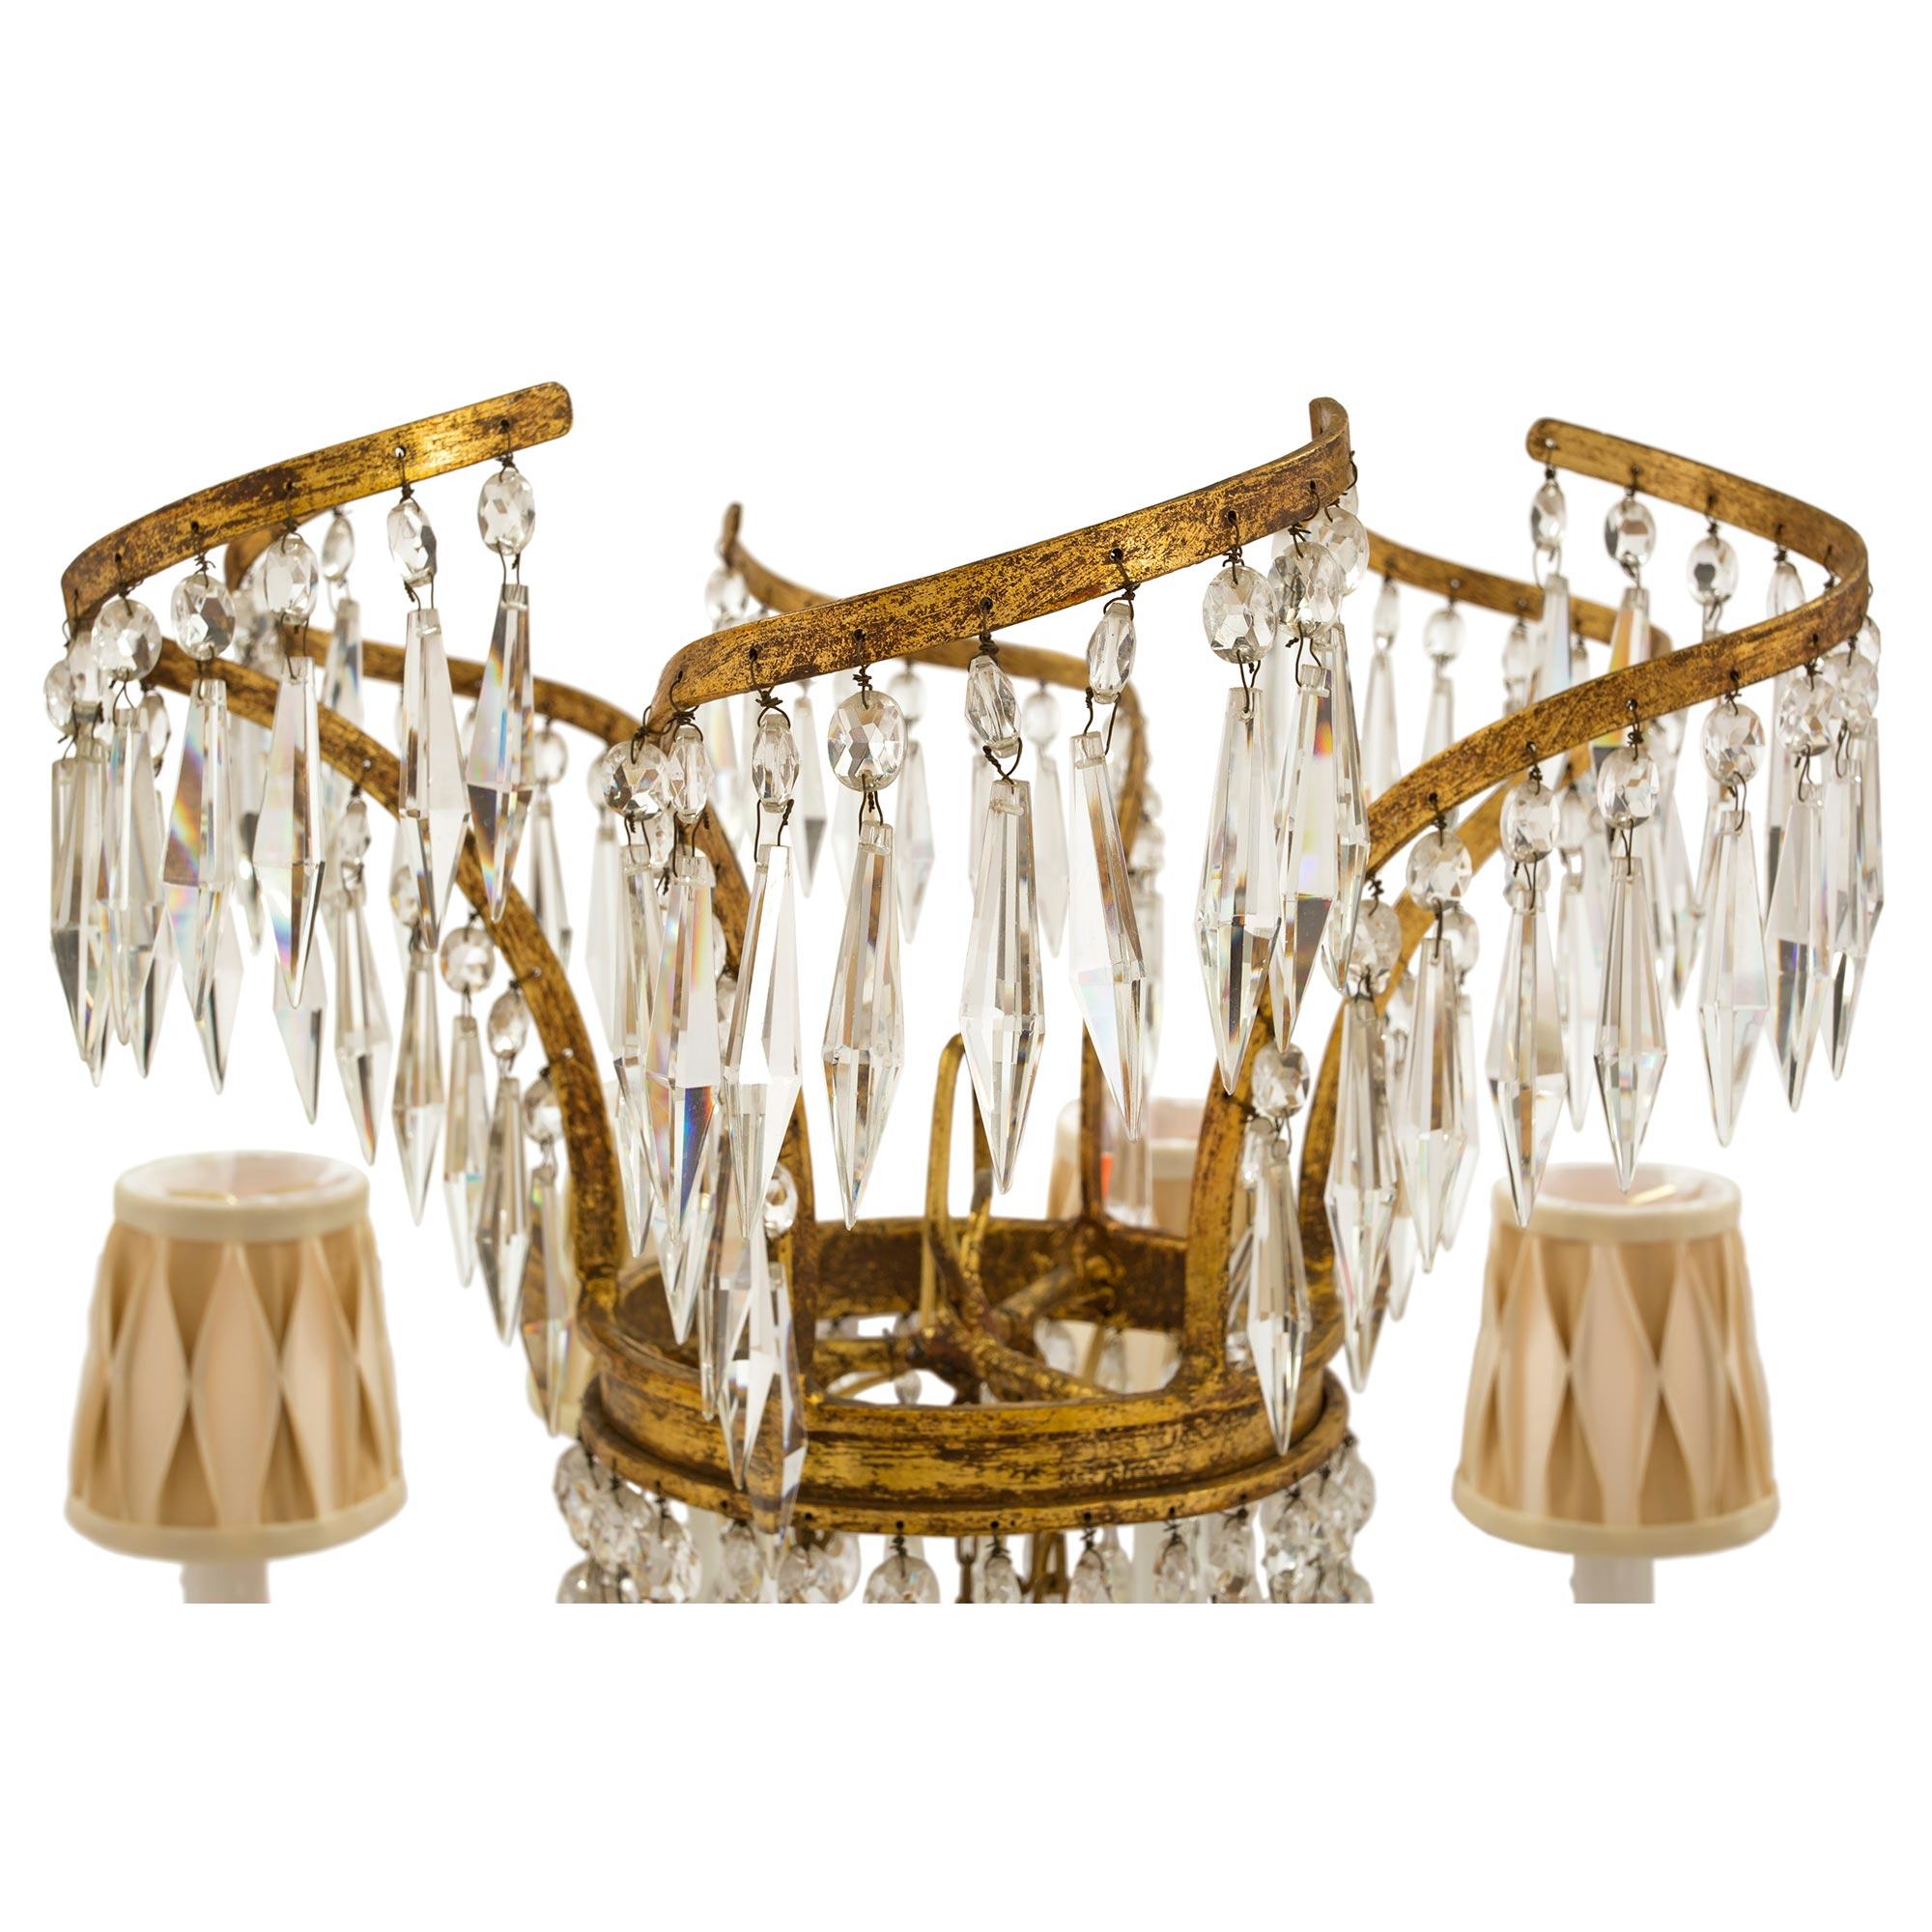 A beautiful Baltic 19th century Neo-Classical st. gilt iron and crystal, twelve light chandelier. The chandelier is centered by a a fine array of prism cut crystals arranged in a most decorative star shape. The uniquely shaped arms display